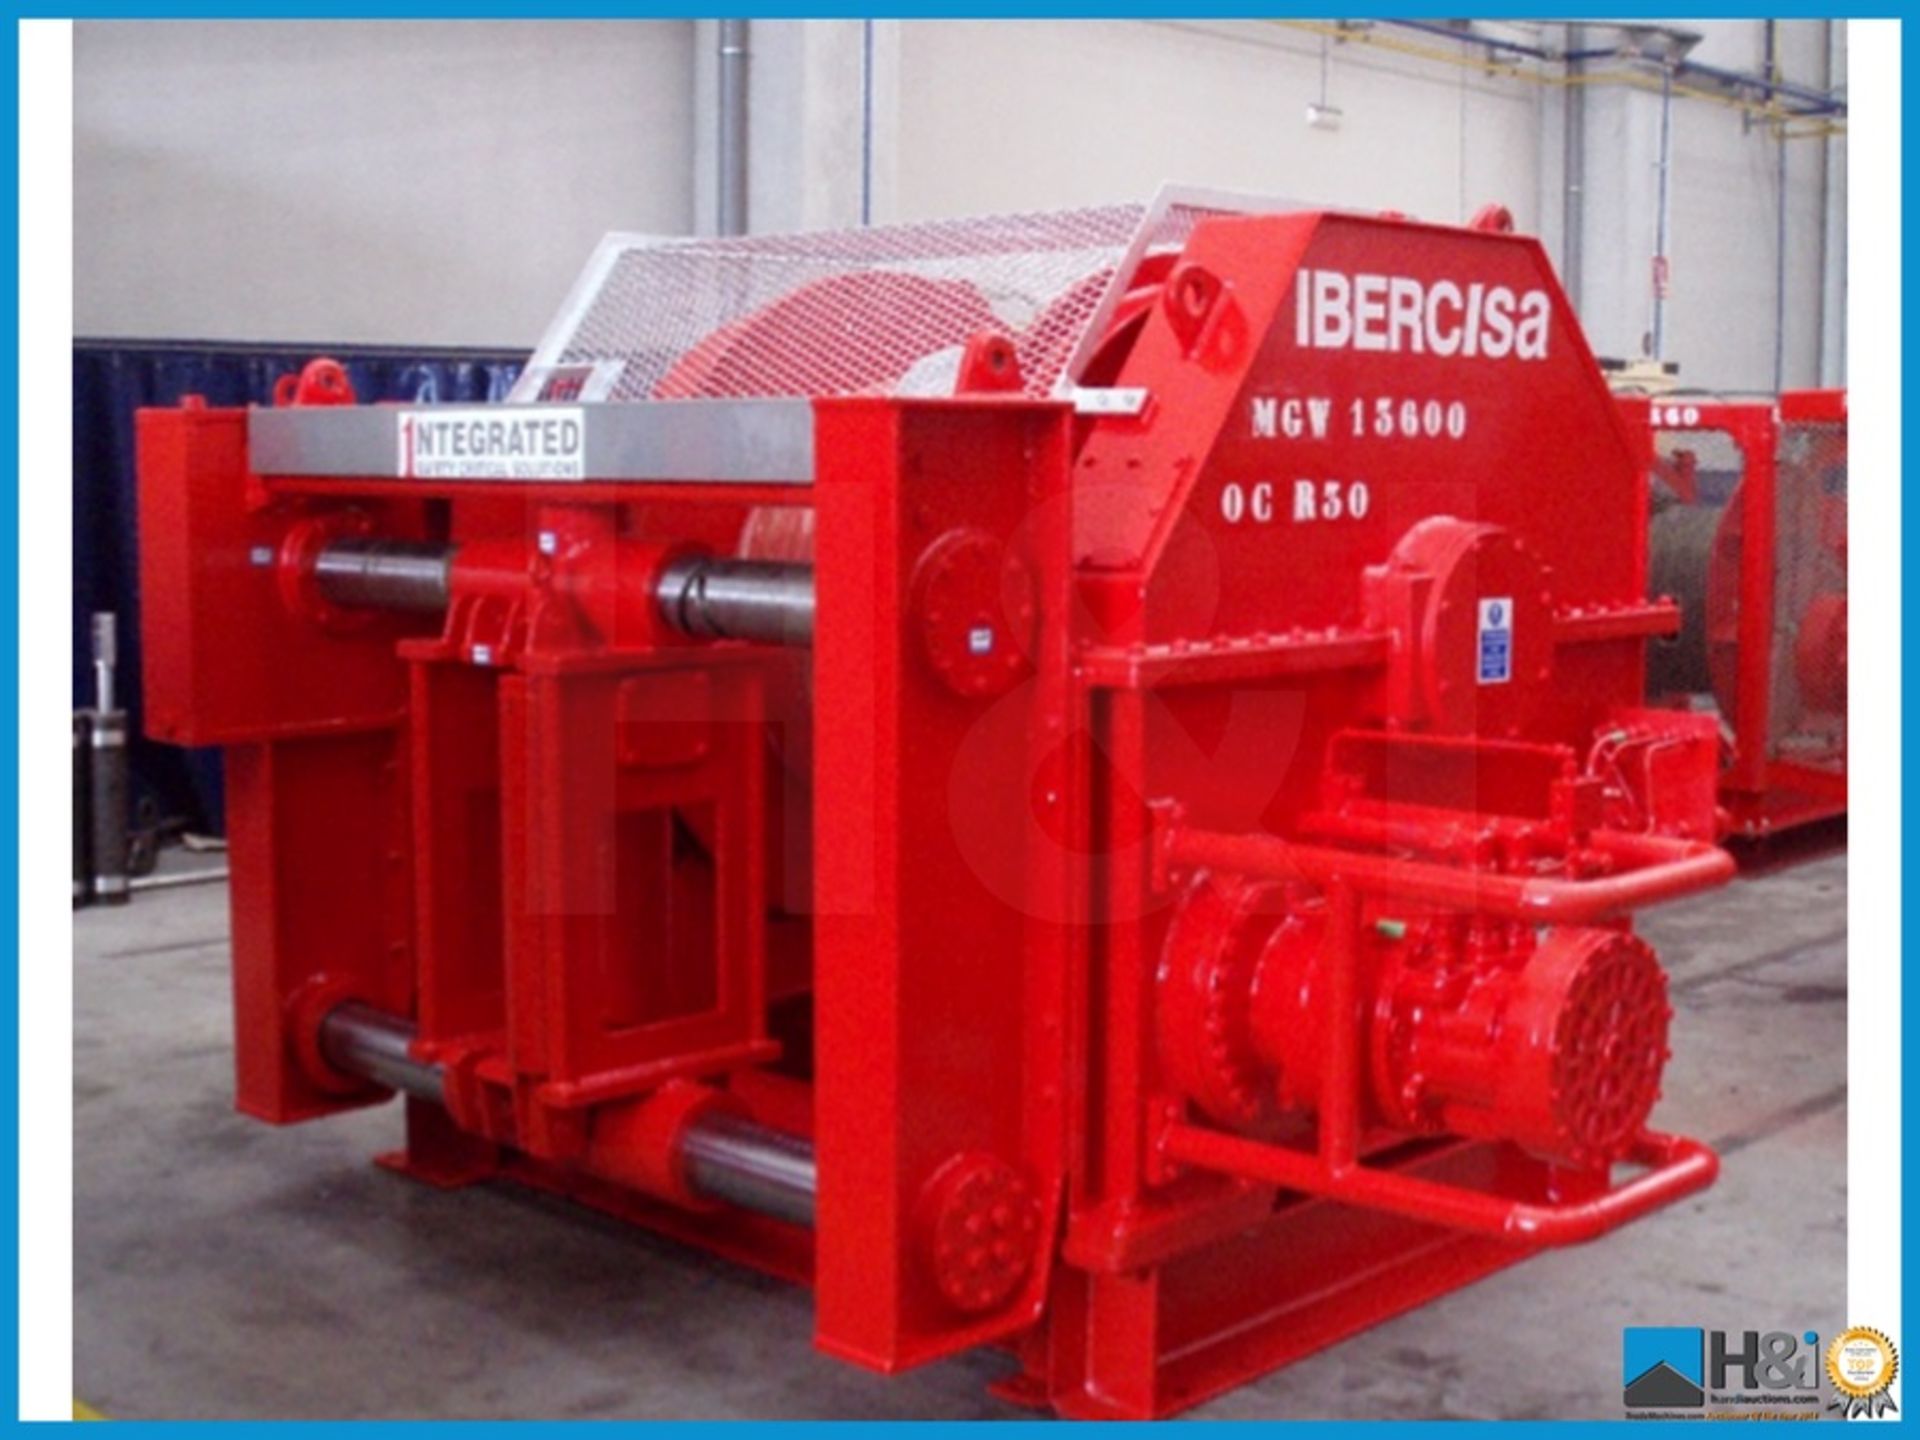 New and unused Ibercisa 35t Hydraulic drum winch. Western European manufactured. 35te WLL Winch is